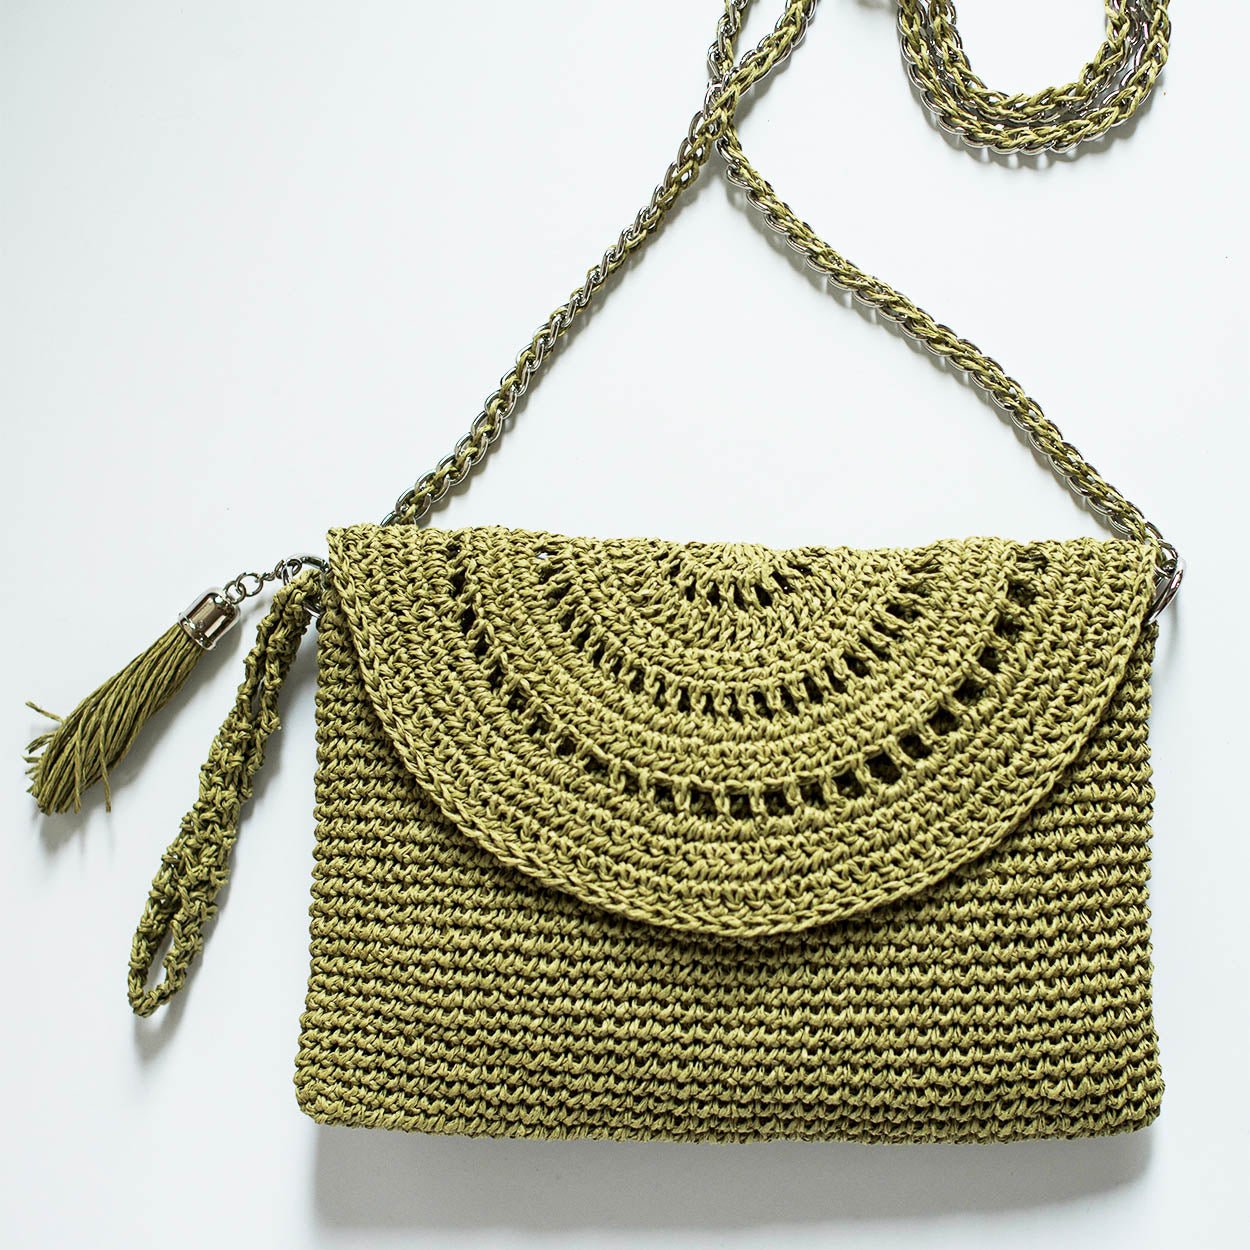 Grace Bag hand crocheted with sustainable paper yarn - Moss - SJW BAGS LONDON